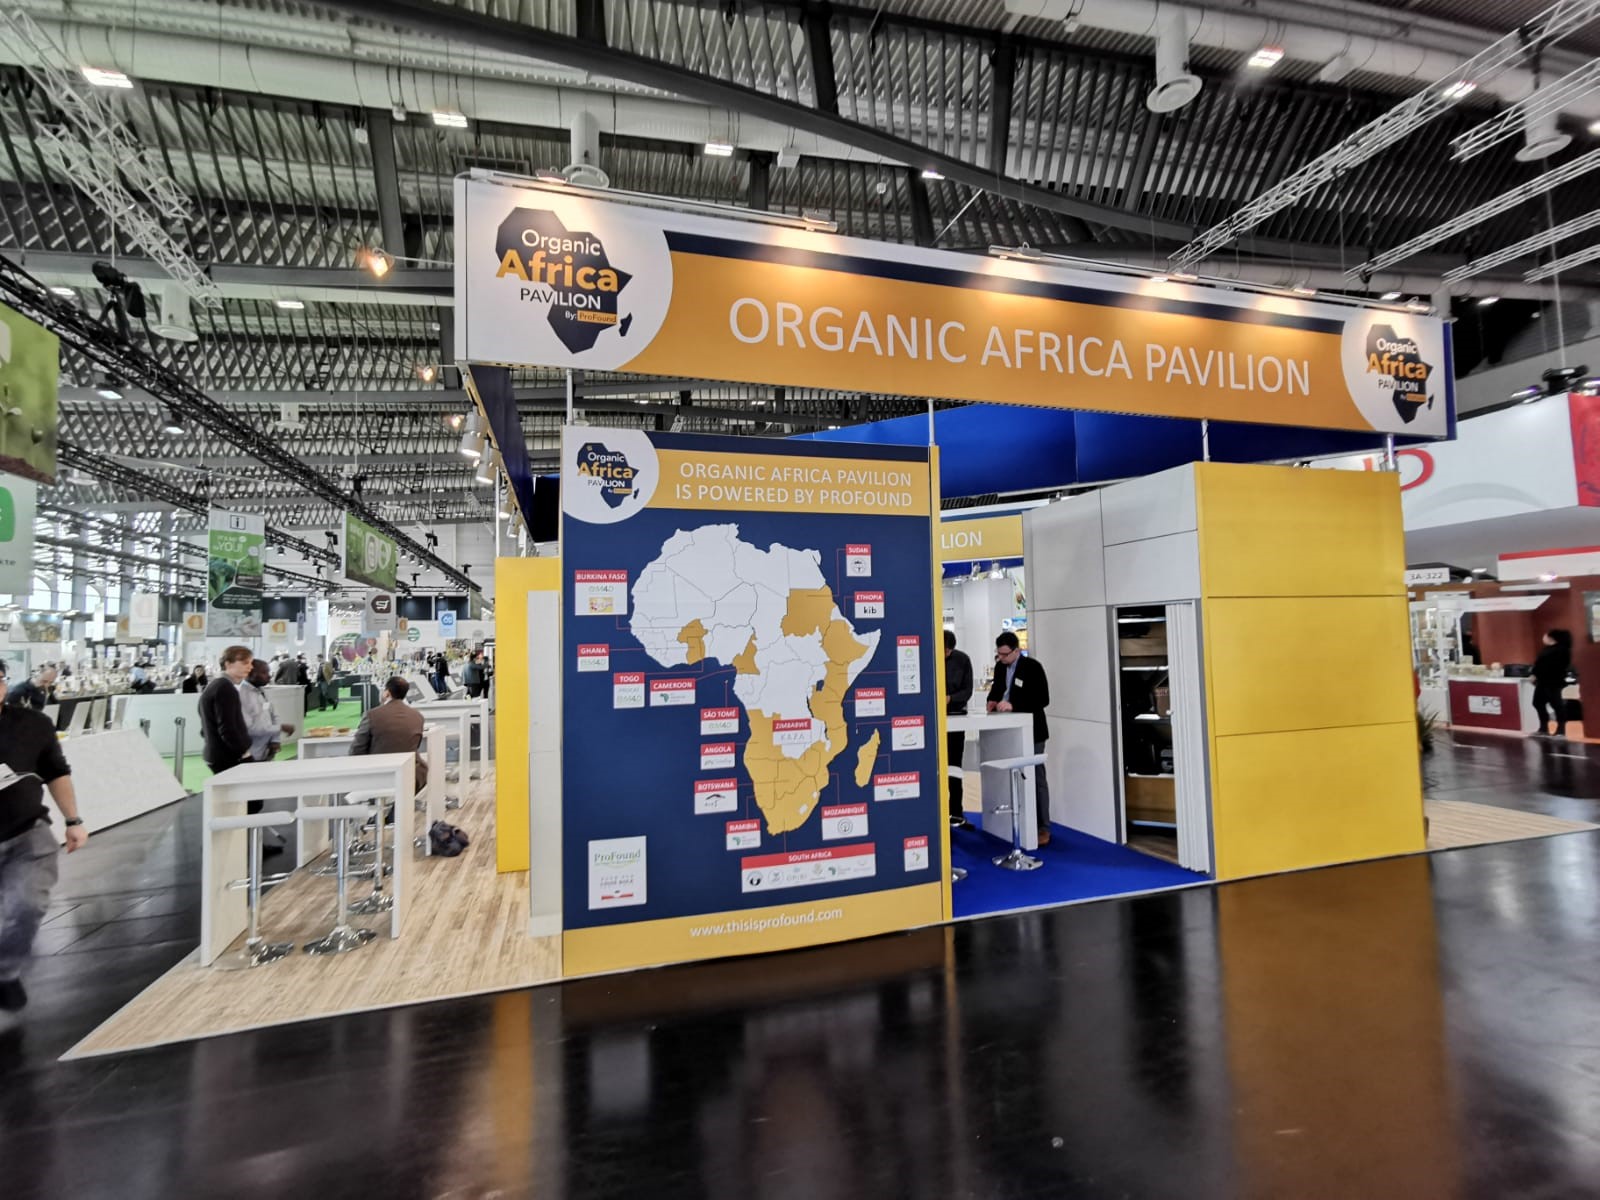 The map of Africa and the exhibitors at the Pavilion in 2020